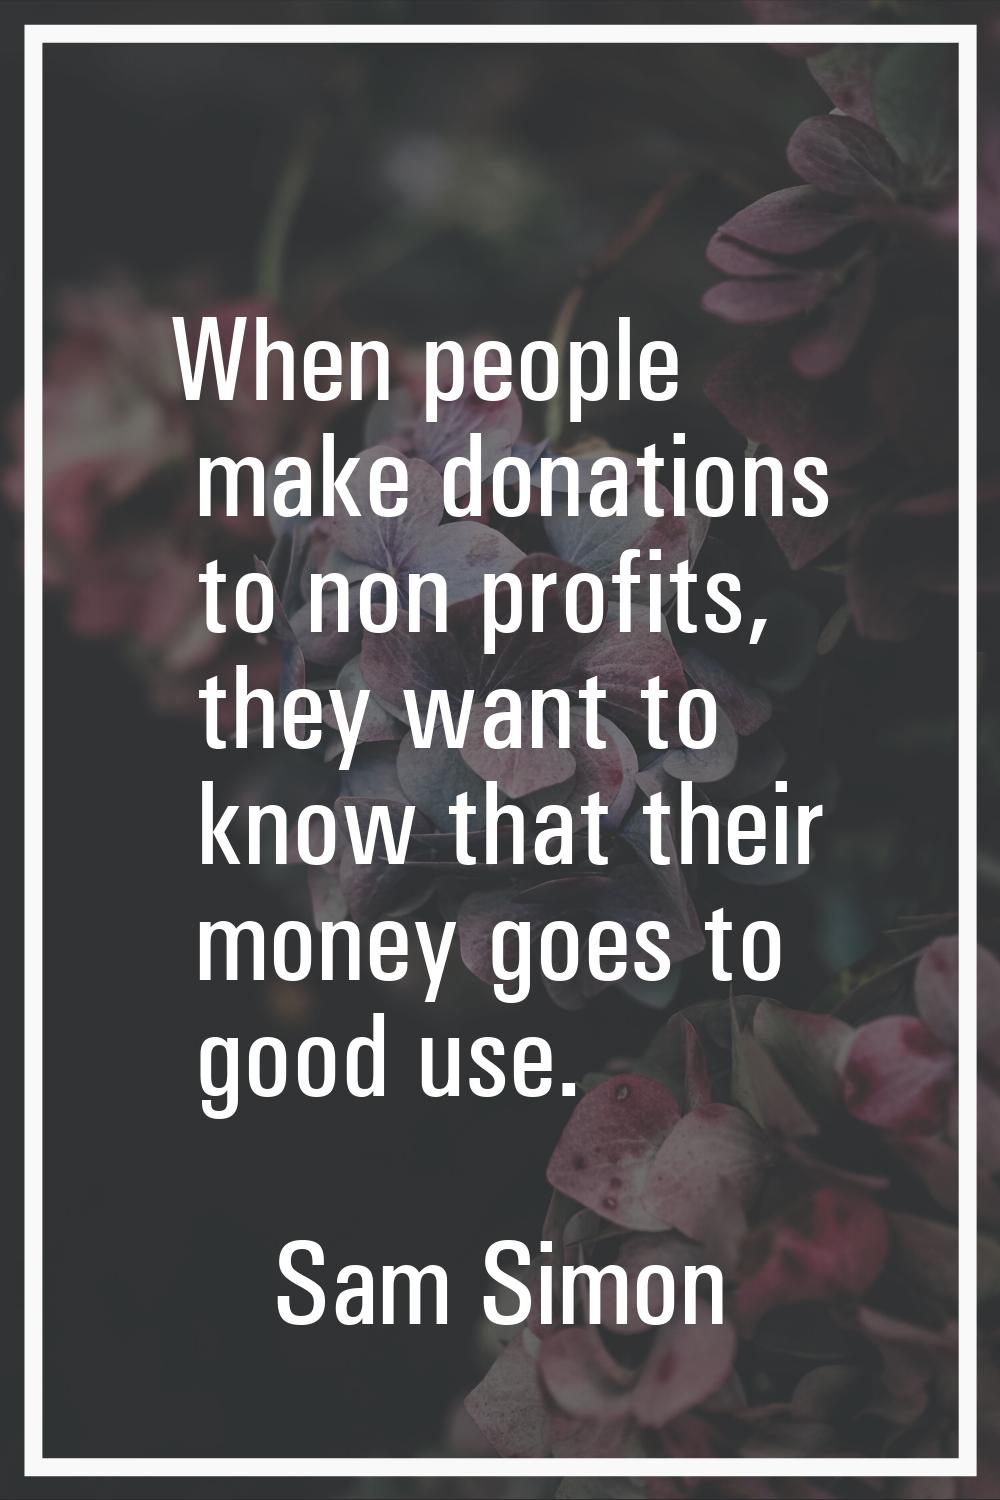 When people make donations to non profits, they want to know that their money goes to good use.